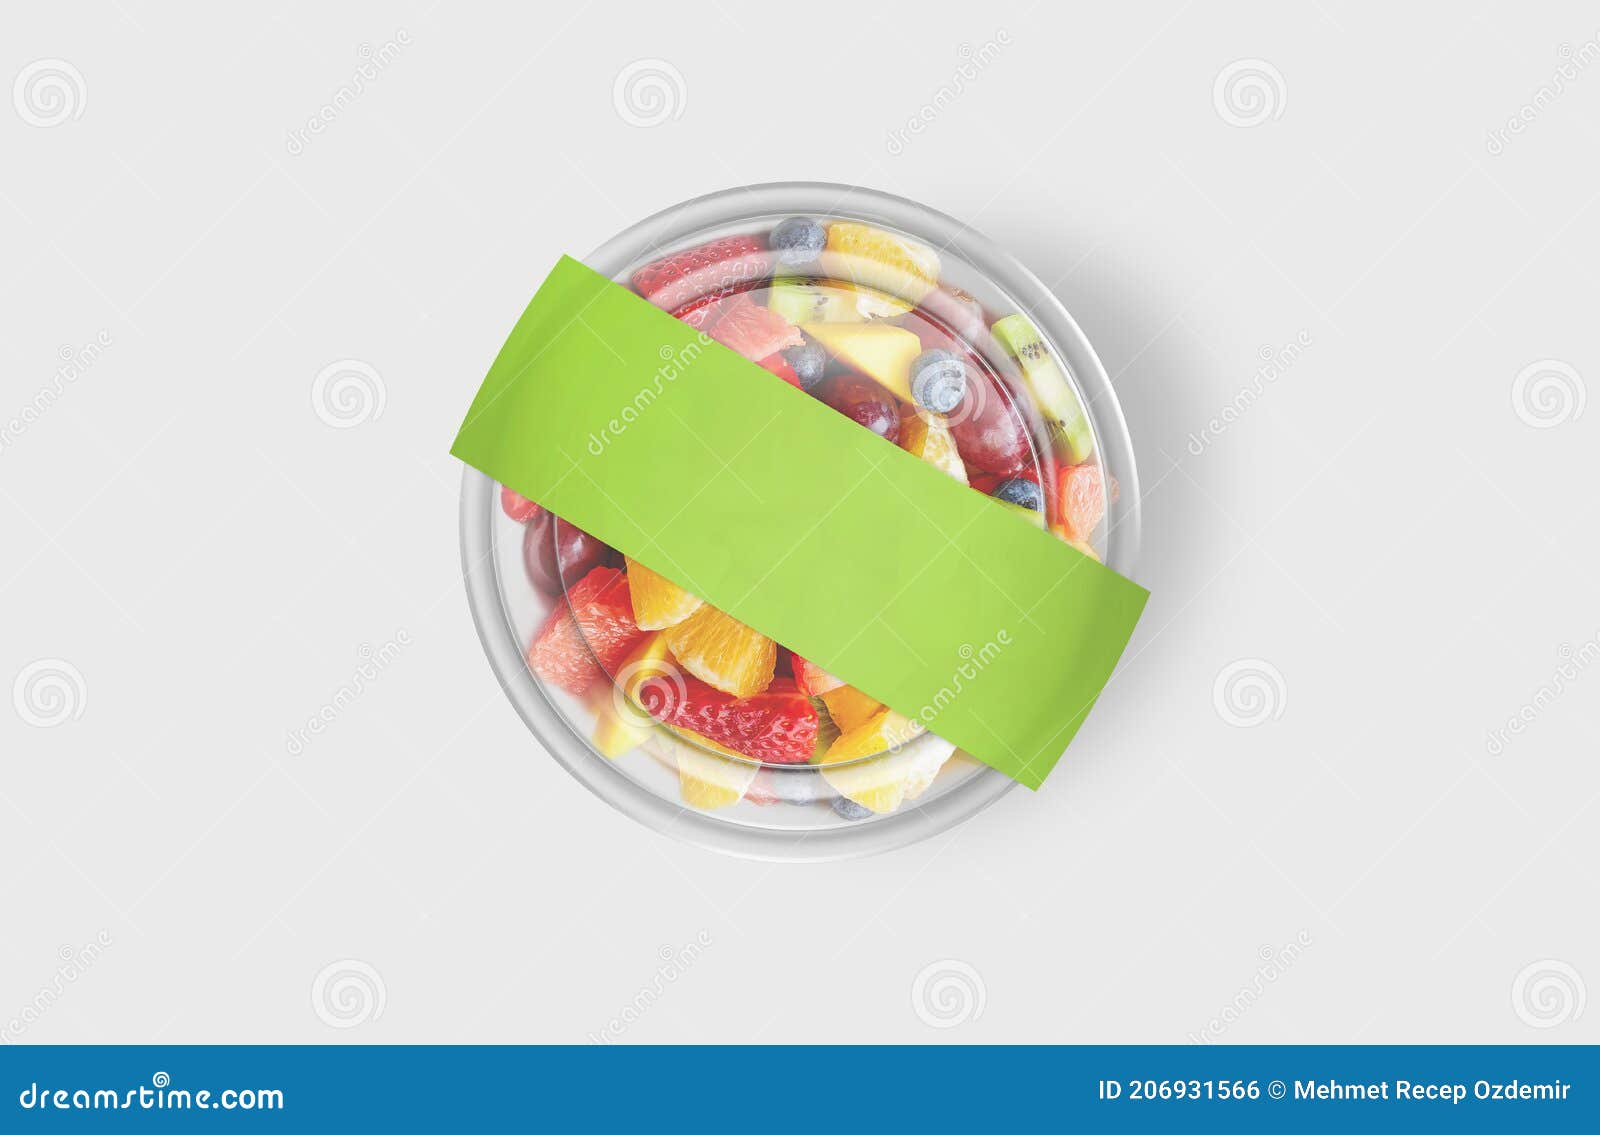 Download 13 654 Food Container Mockup Photos Free Royalty Free Stock Photos From Dreamstime